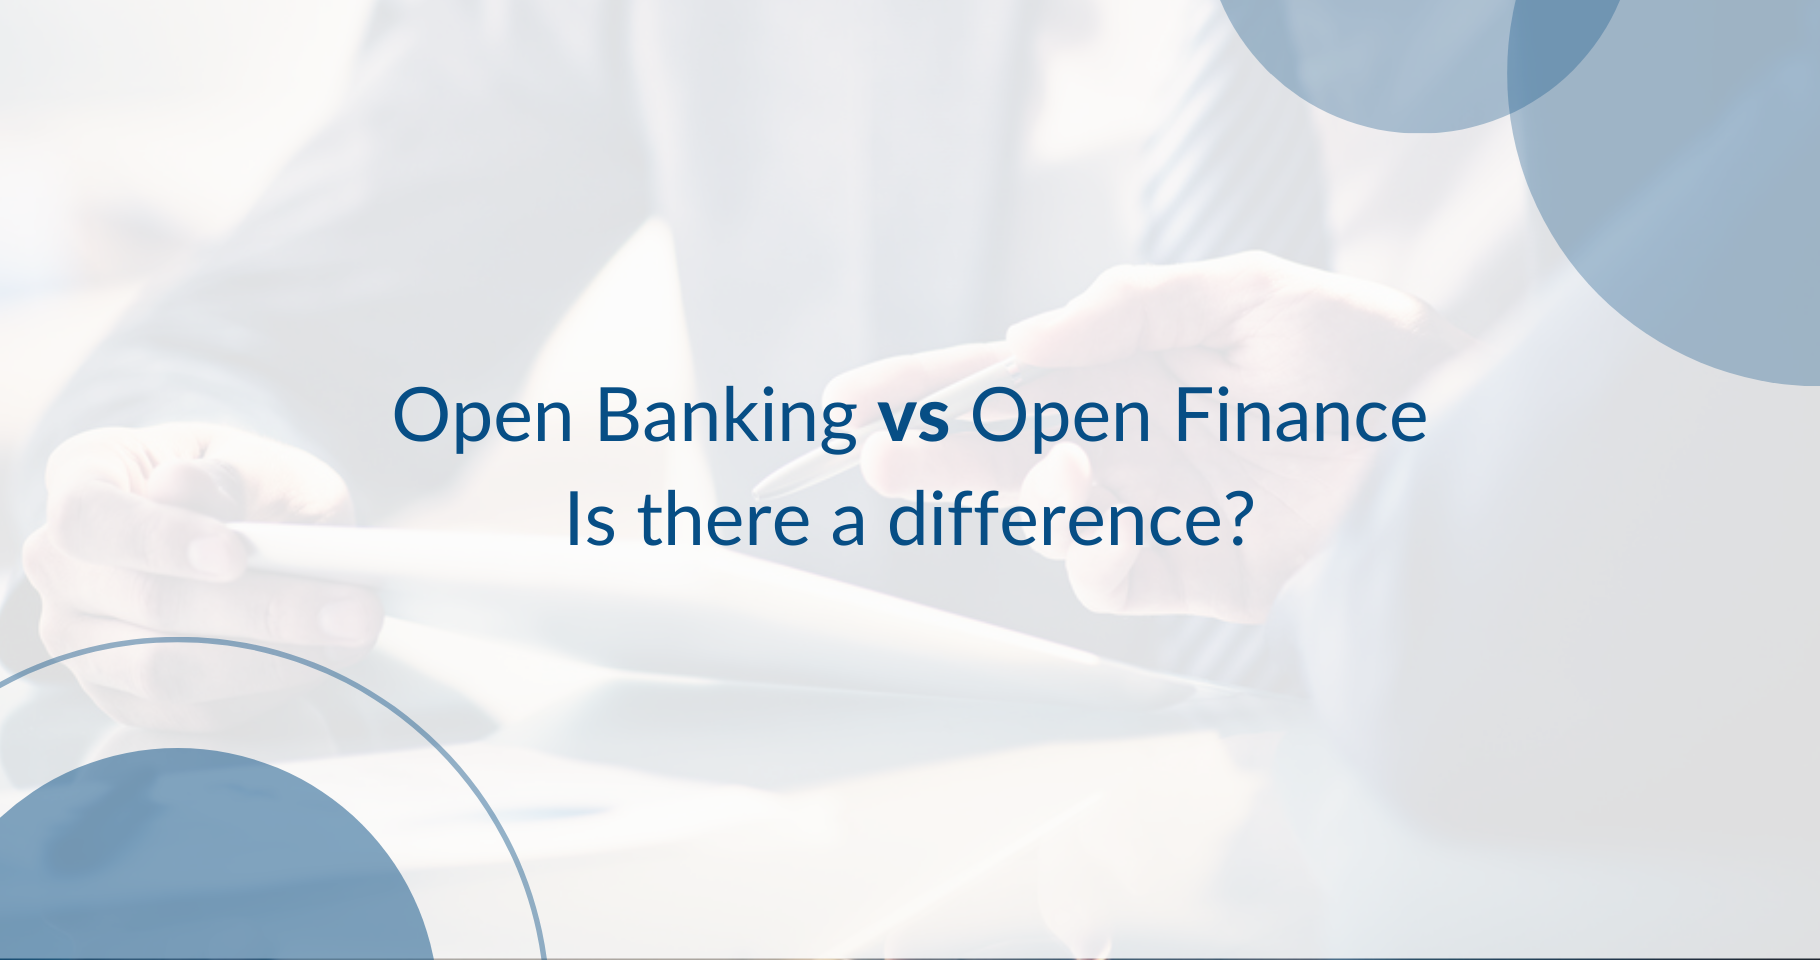 Open Banking vs Open Finance: Is there a difference?